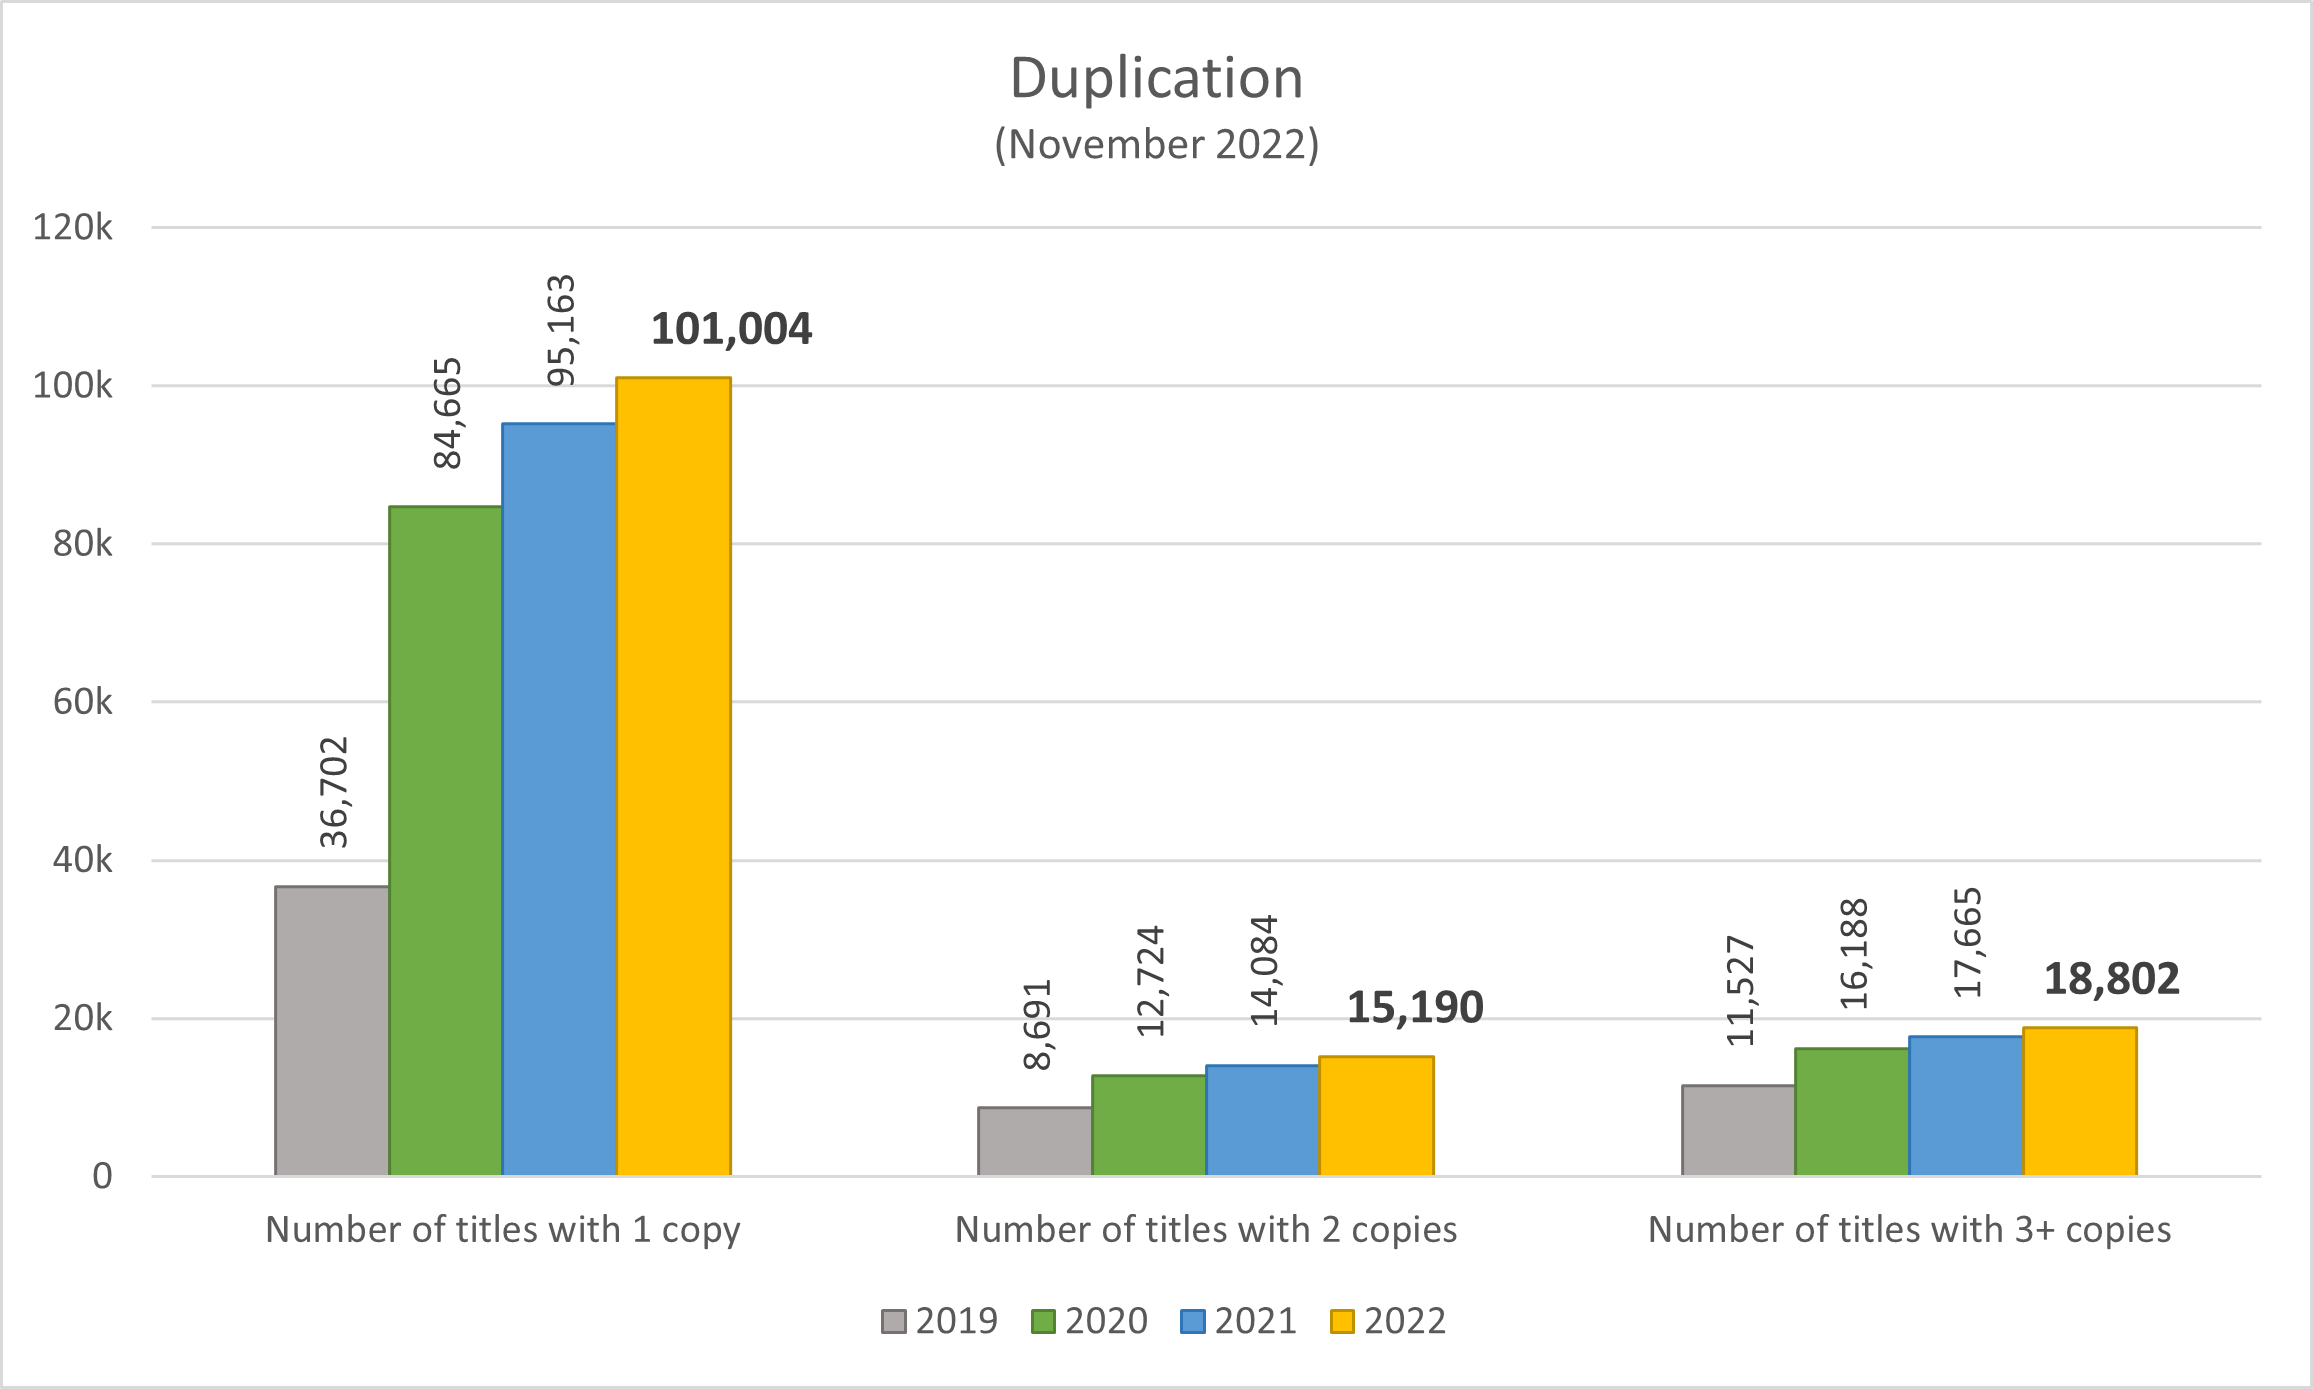 Duplication (November 2022): 101,004 titles with 1 copy; 15,190 titles with 2 copies; 18,802 titles with 3 or more copies